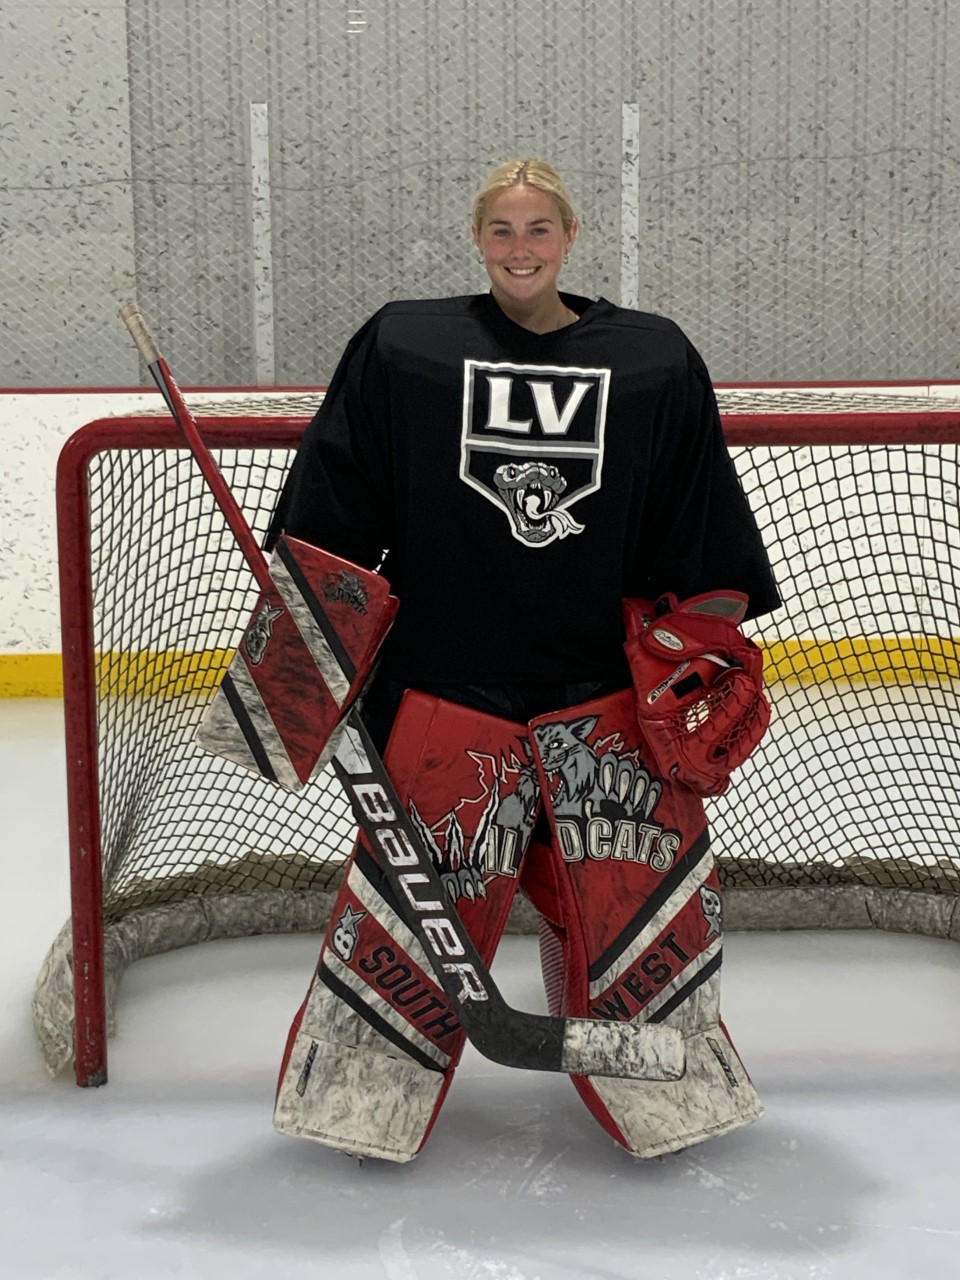 Amherstburg’s Faucher Turns Heads At Vipers Camp